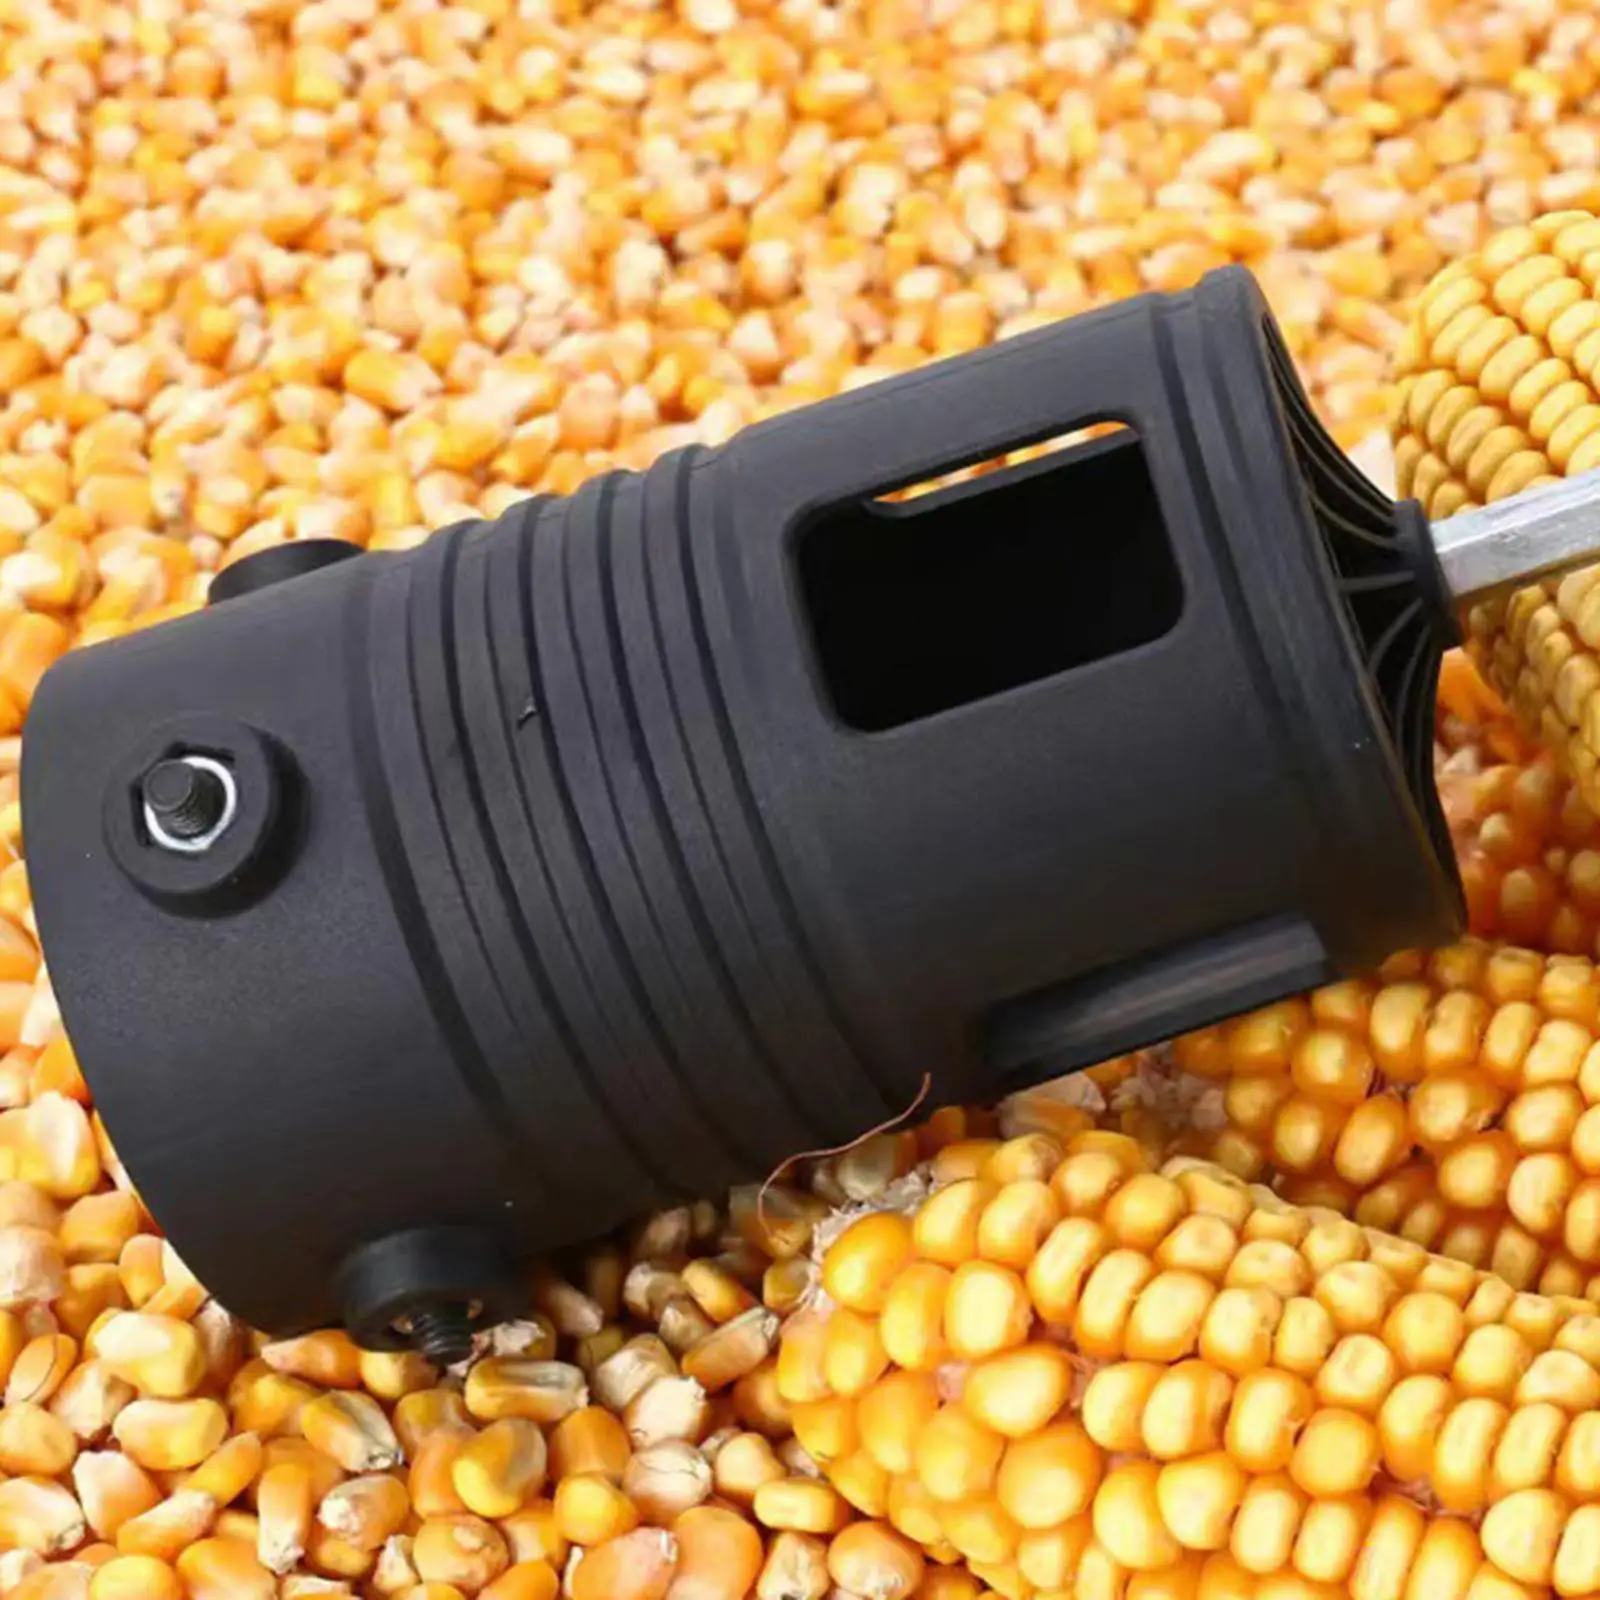 Corn Thresher Strip Tool Hand Drill for Popcorn Easy Corn Remover Corn Peel for Farms Home Families Kitchen Restaurant